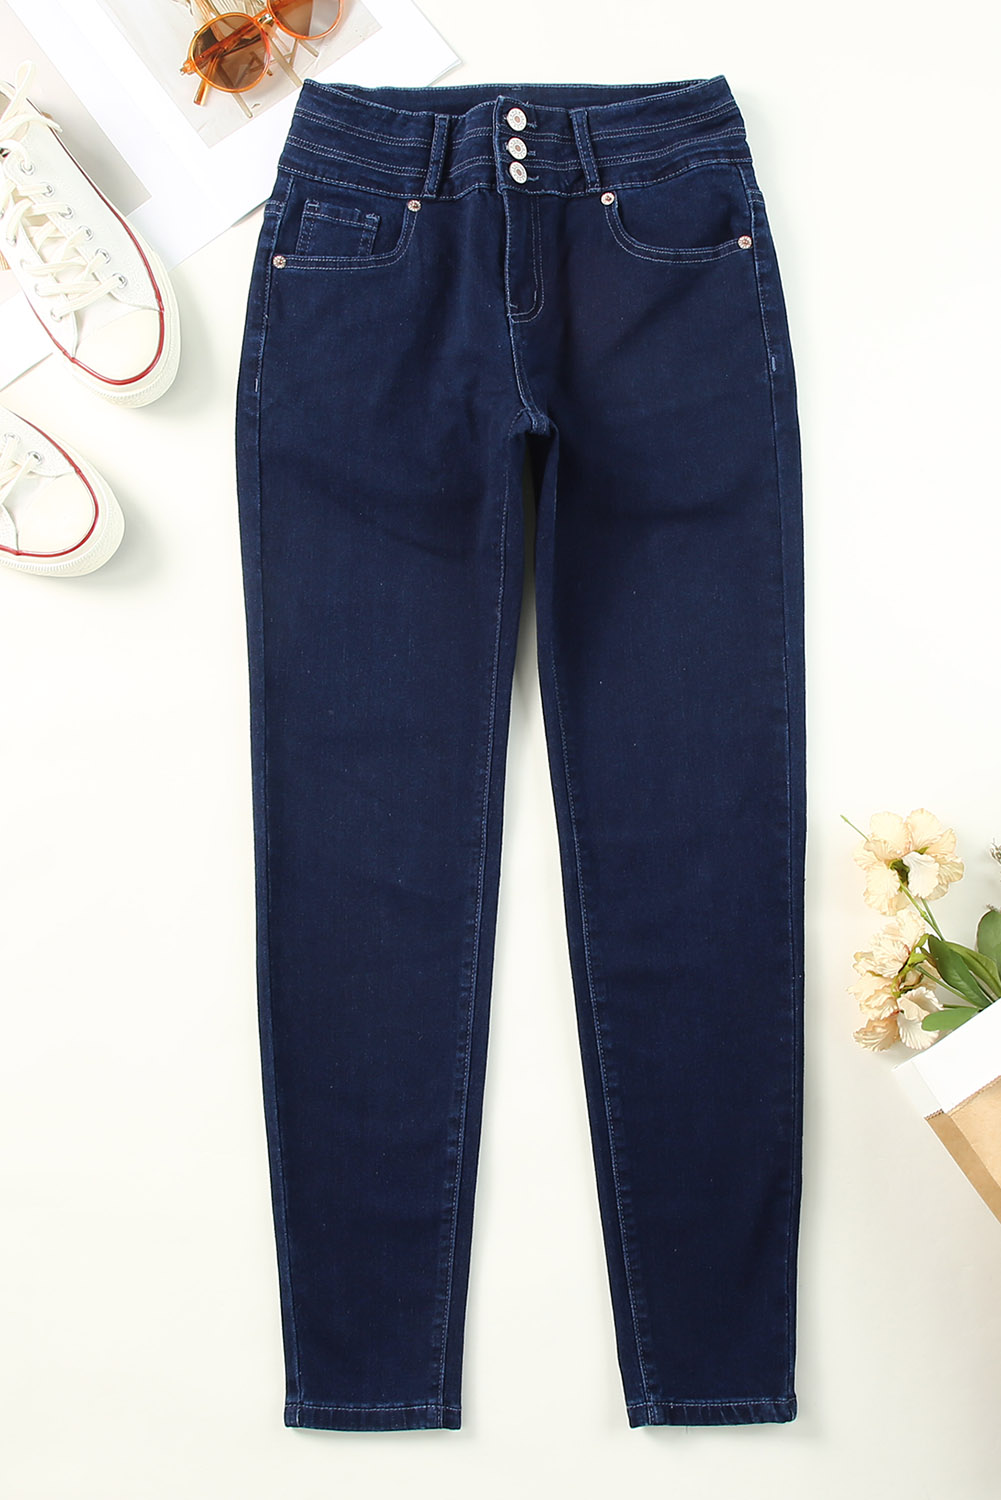 Wholesale Dark Blue Casual Buttons High Waist SKINNY JEANS